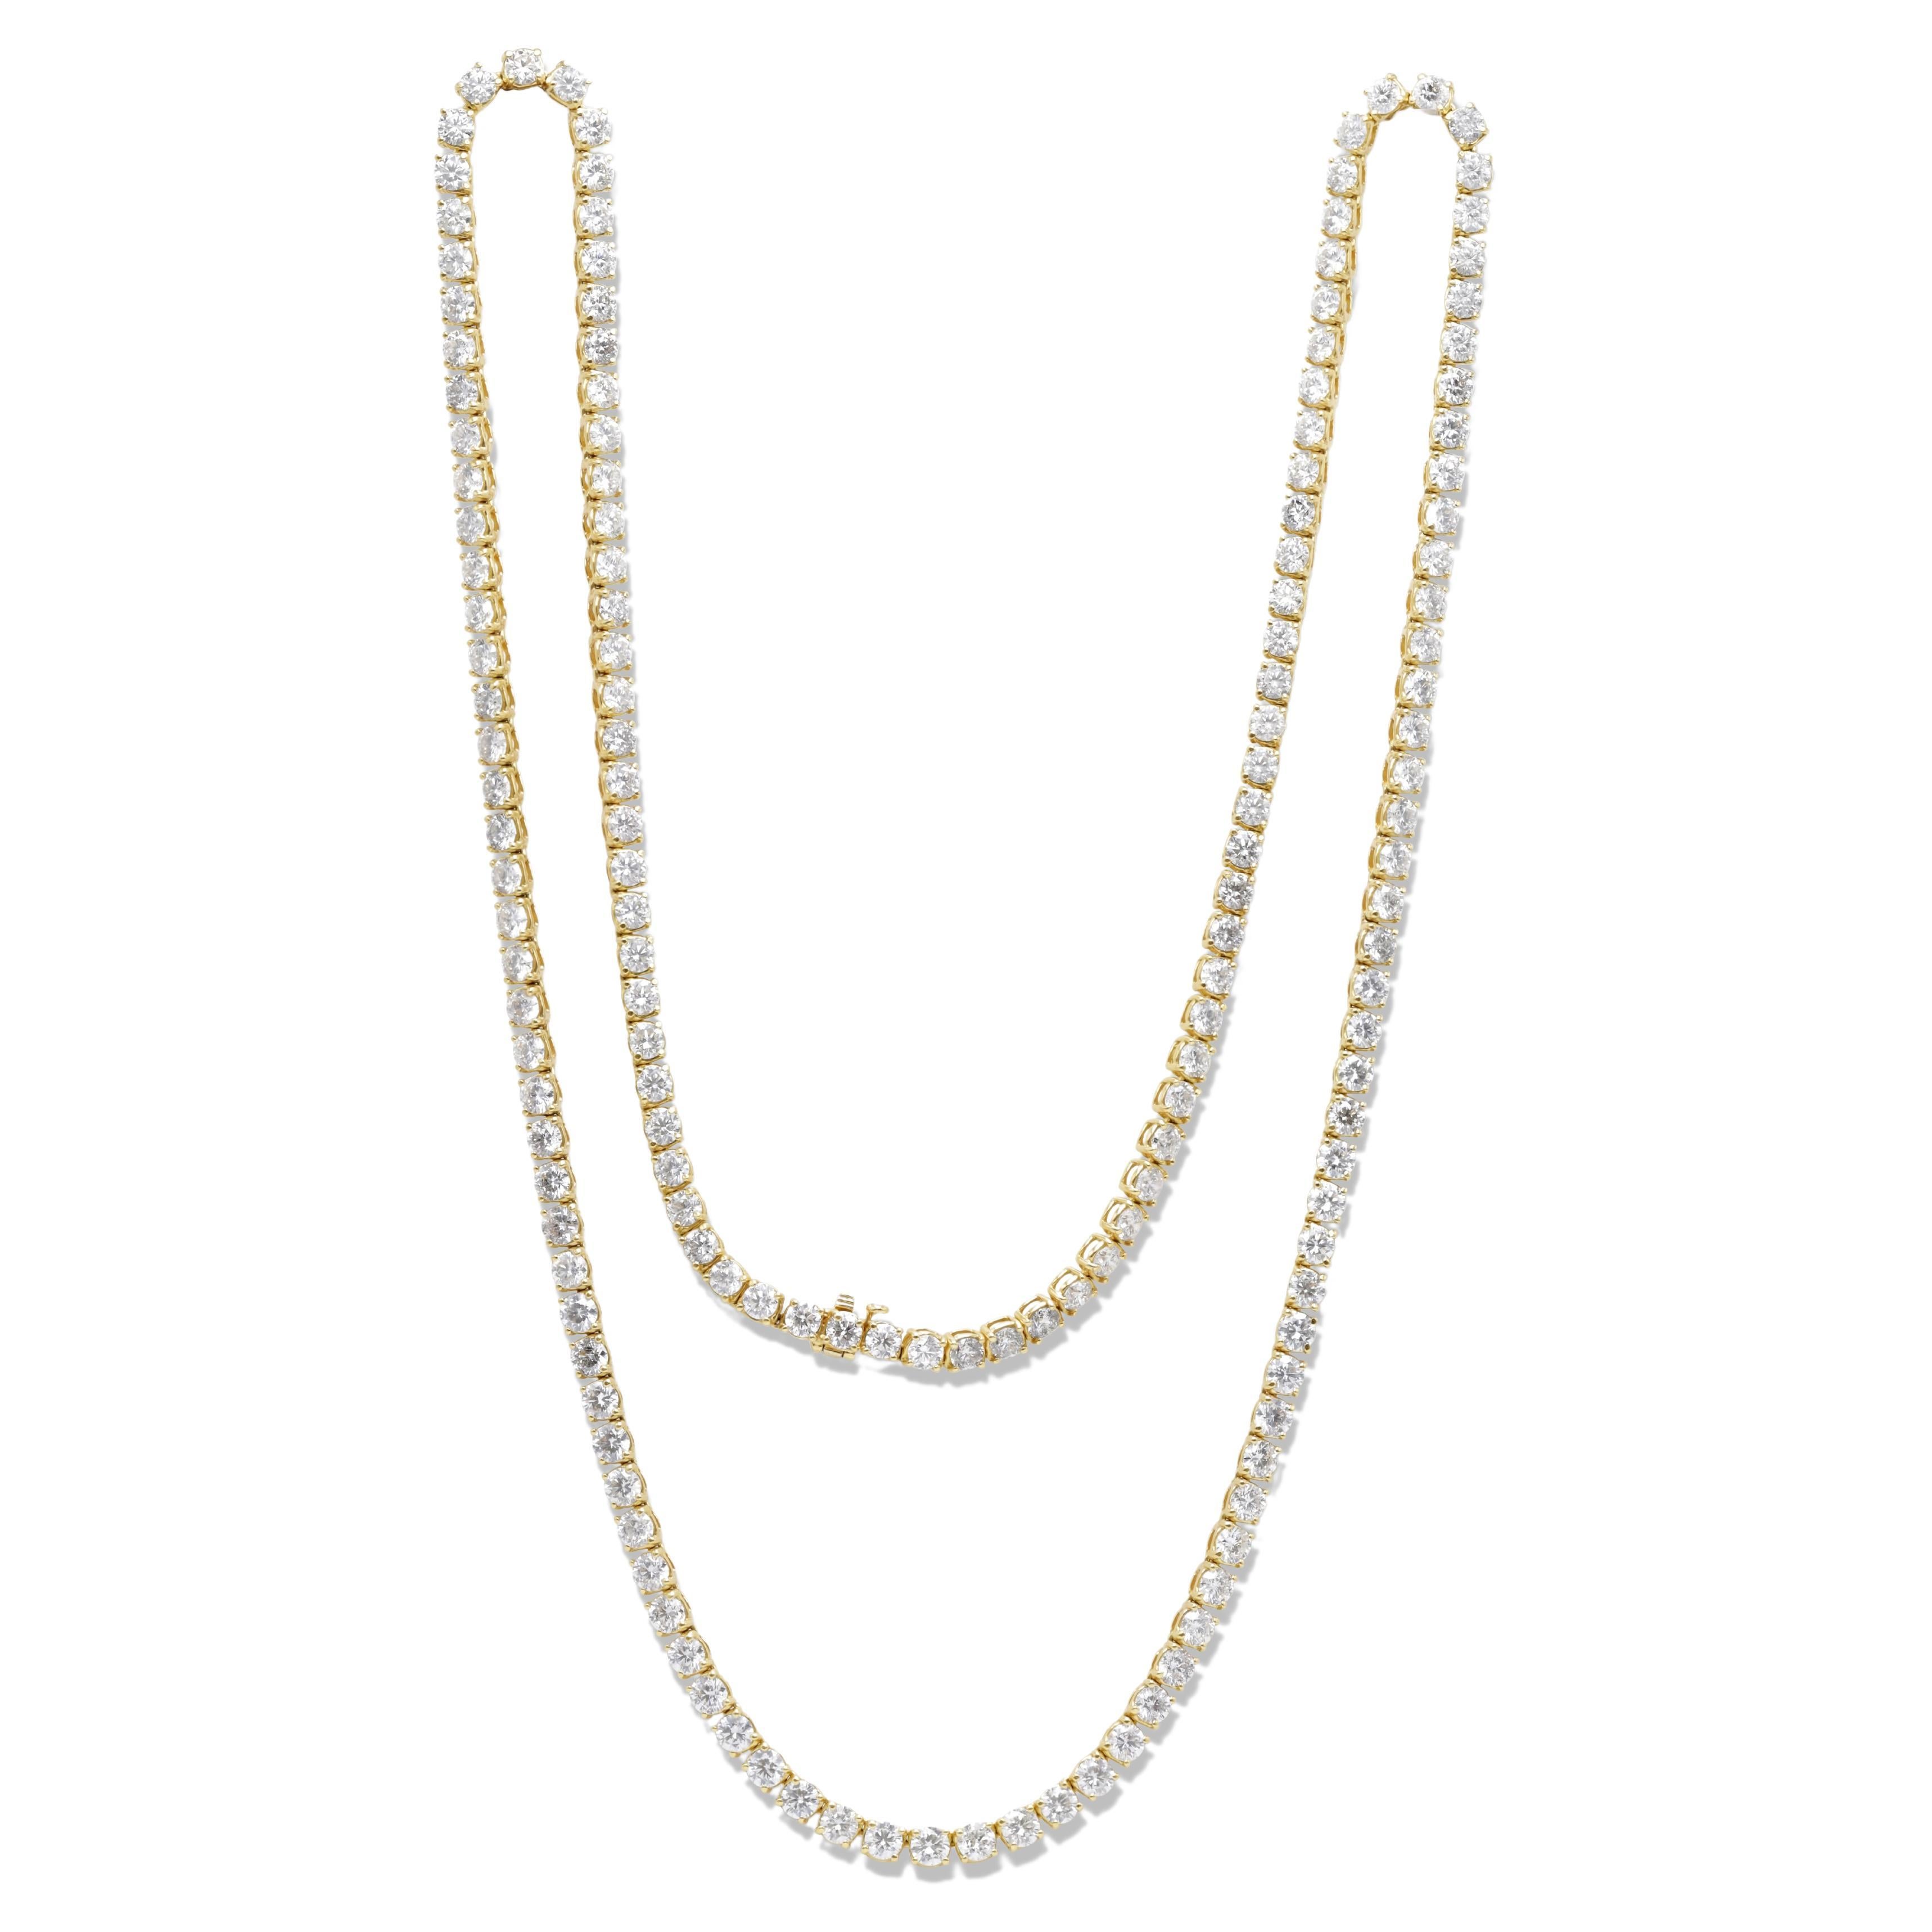 Diana M.  Custom 41.30 Cts 4 Prong Diamond 32" 18k Yellow Gold Tennis Necklace For Sale